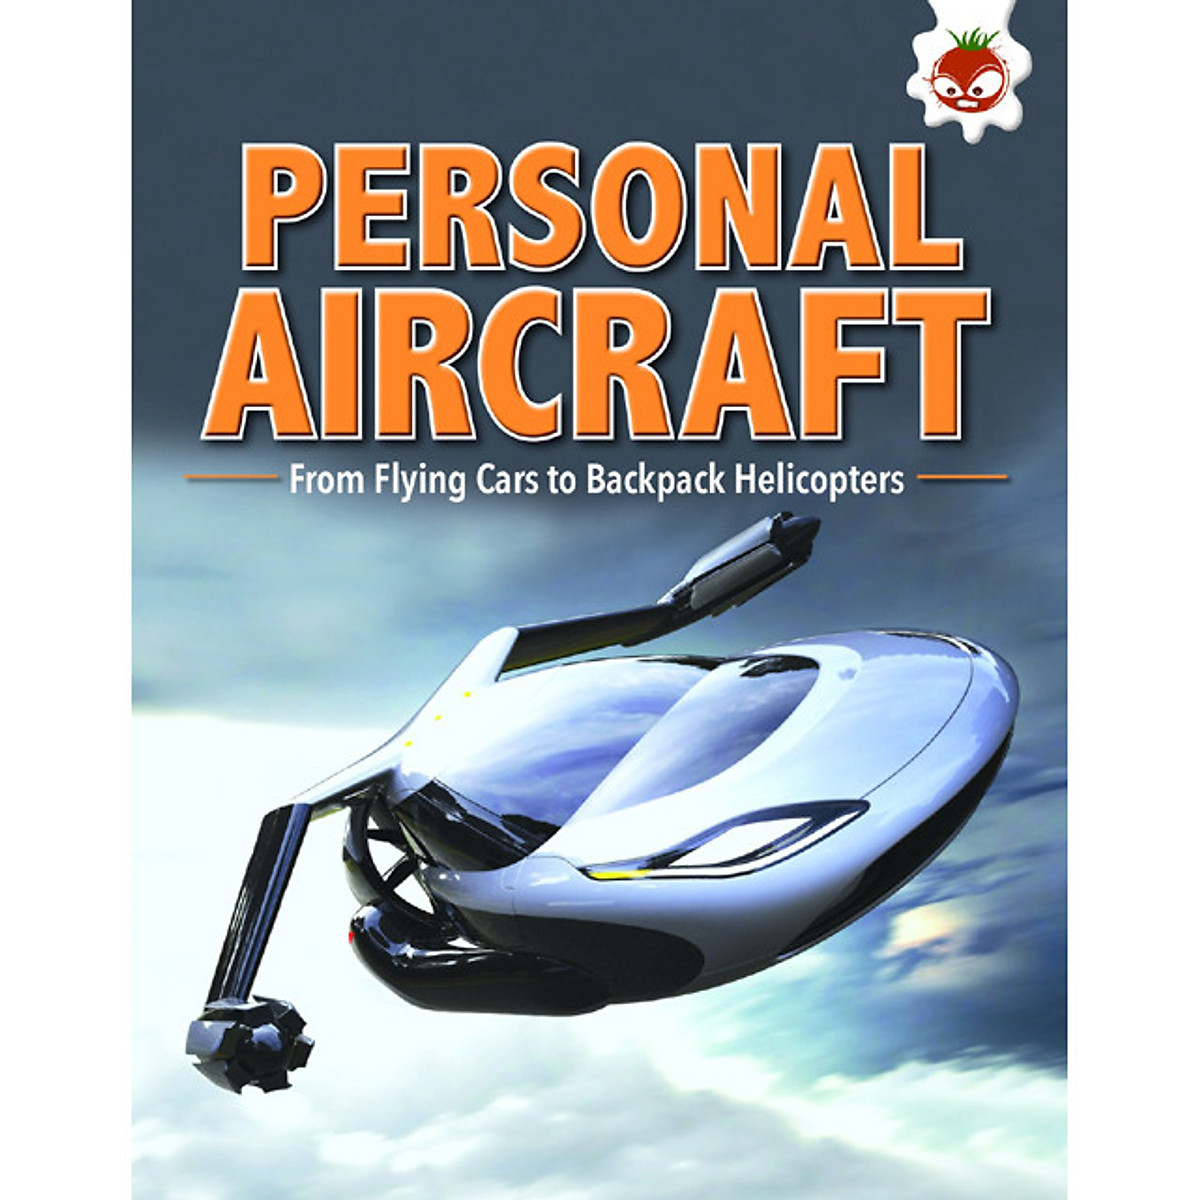 Sách tiếng Anh - Personal Aircraft